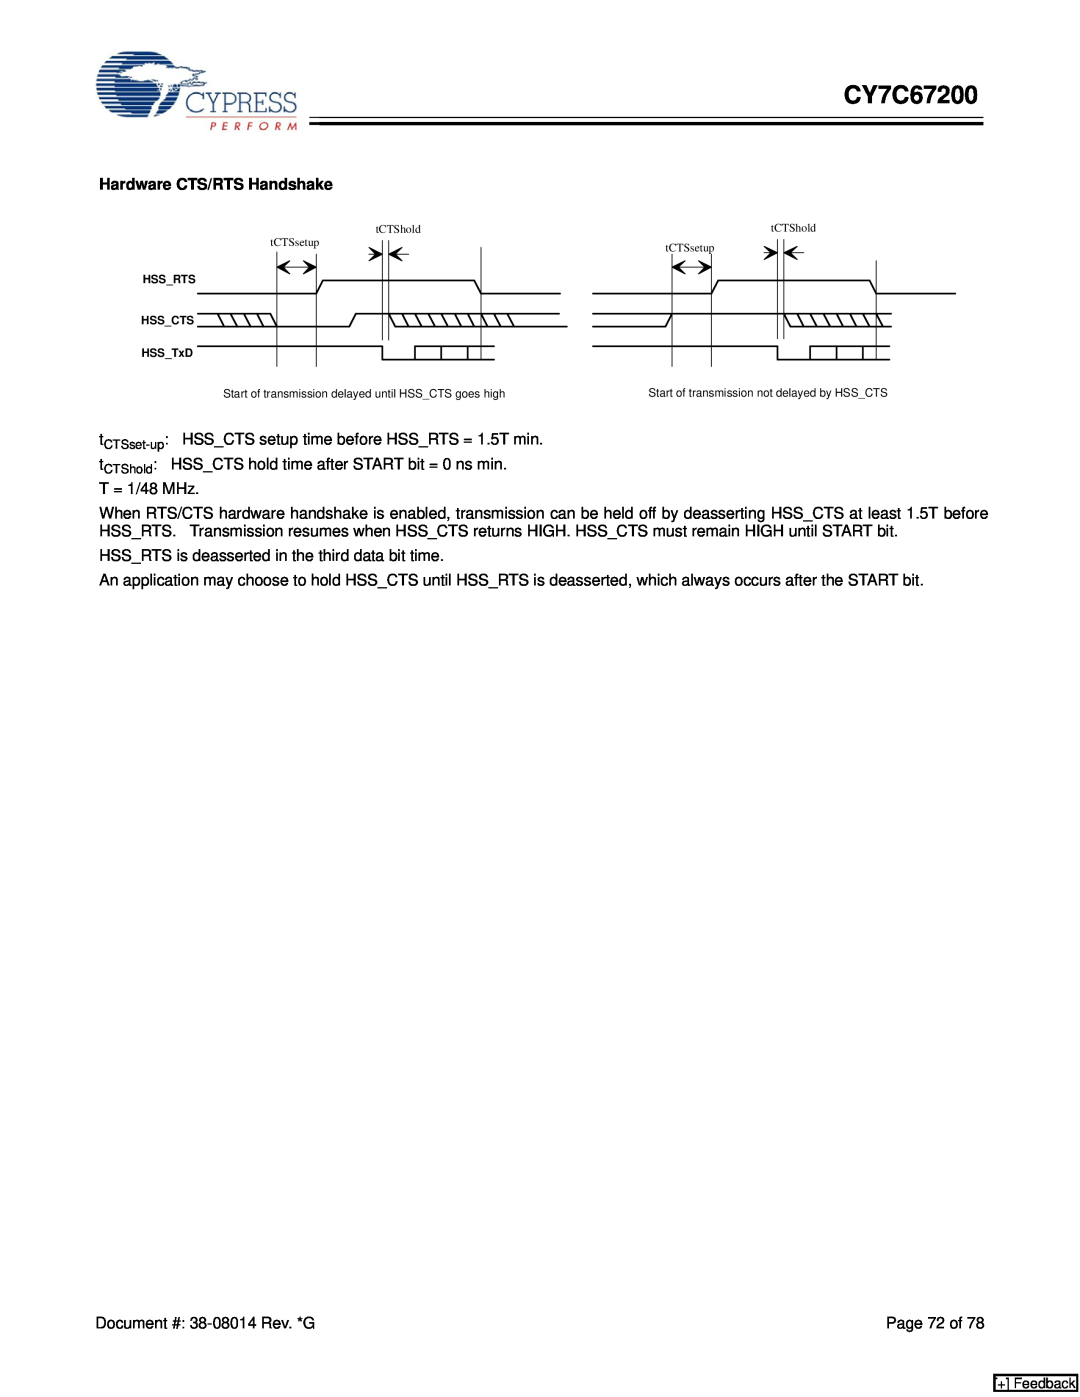 Cypress CY7C67200 manual Hardware CTS/RTS Handshake, Page 72 of 